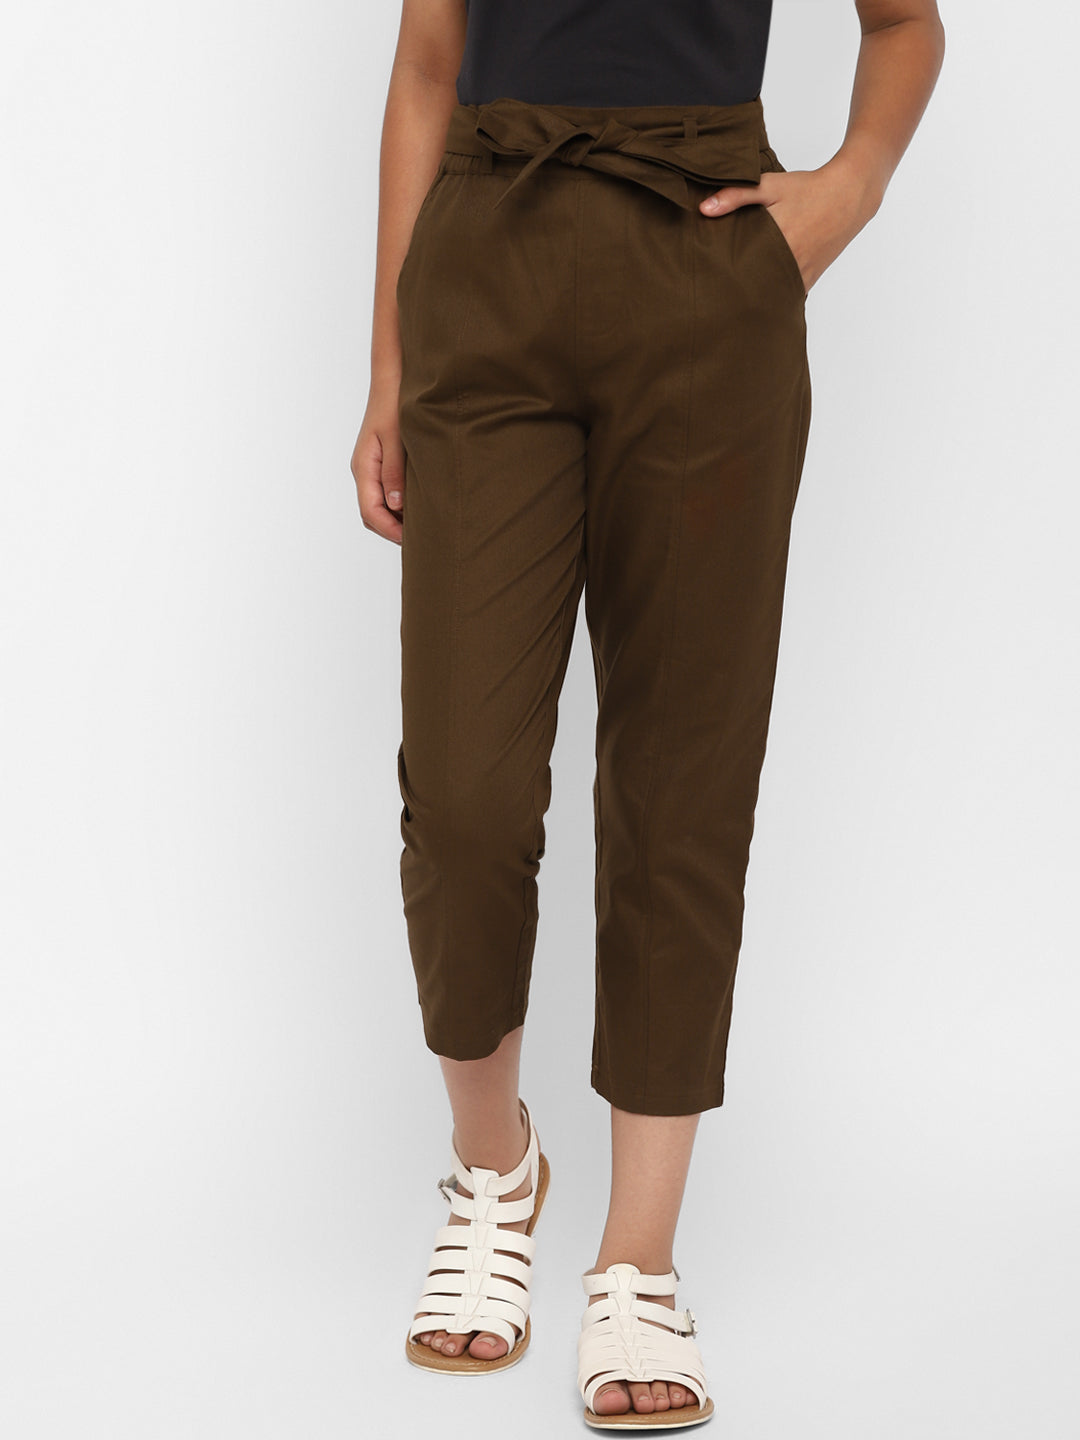 Spunkies-Girls-Lace-Knot-Joggers-Brown